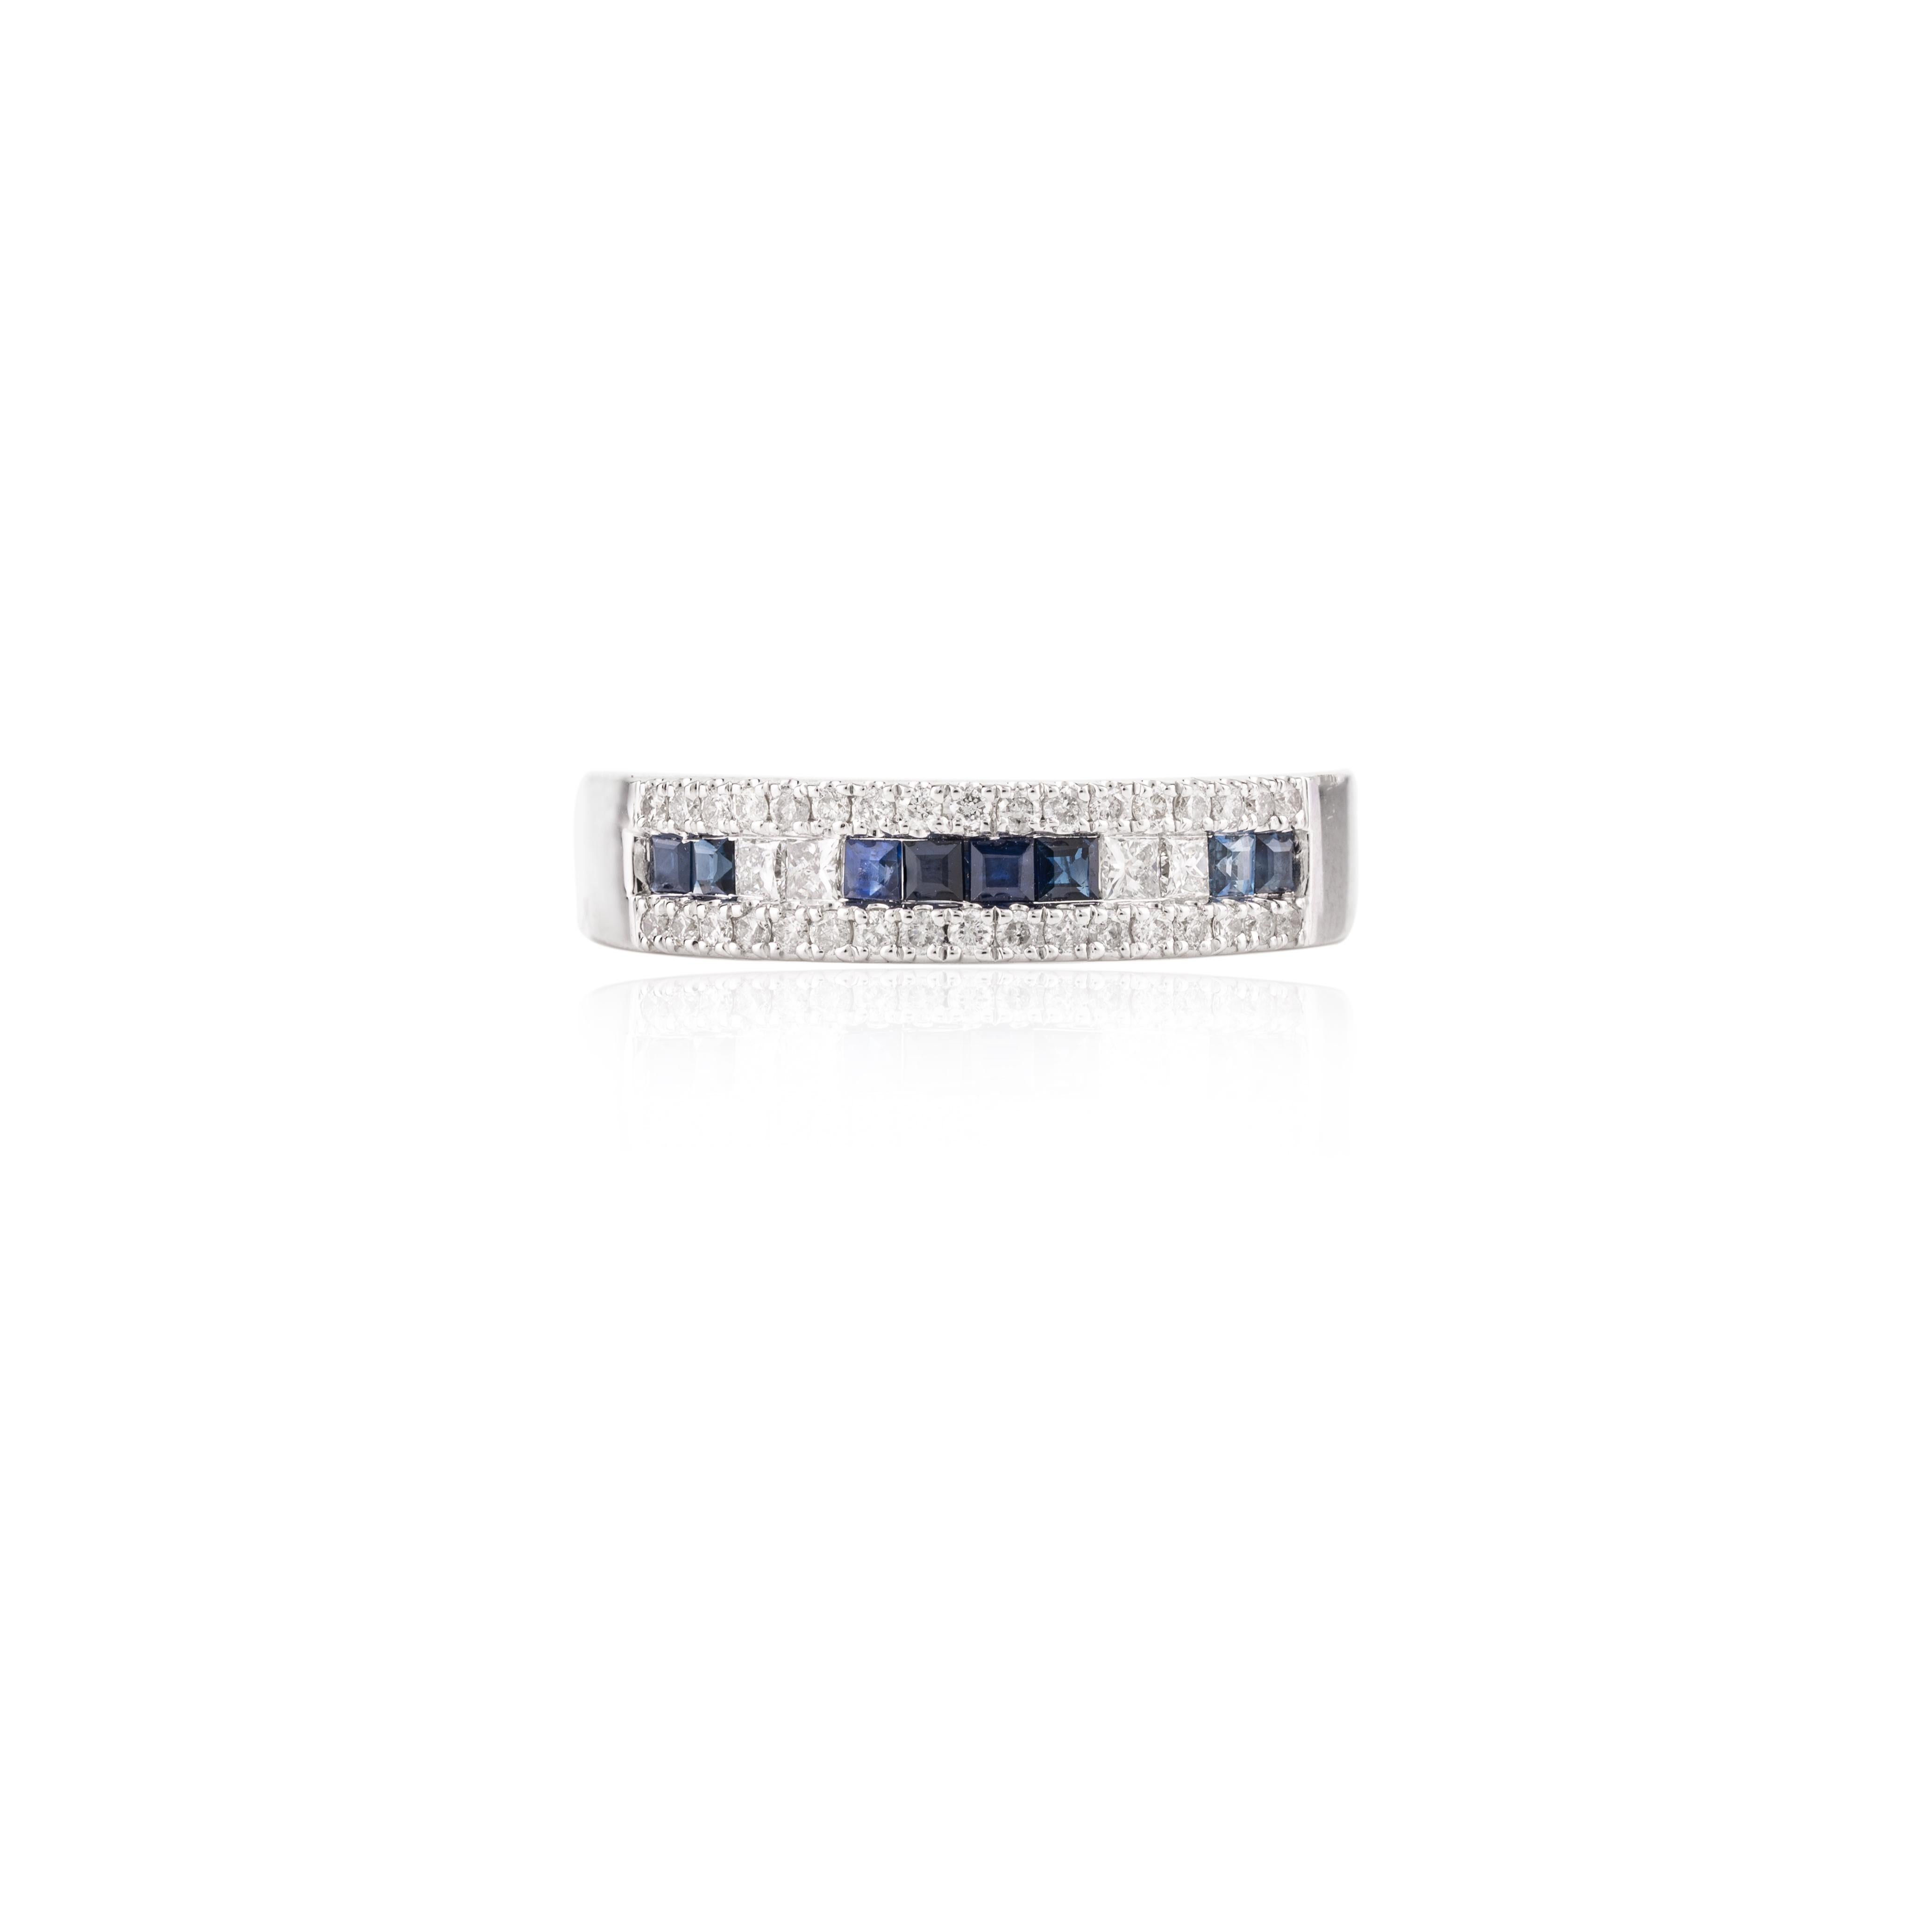 For Sale:  Stunning Blue Sapphire Diamond Engagement Band Ring for Her in 18k White Gold 3